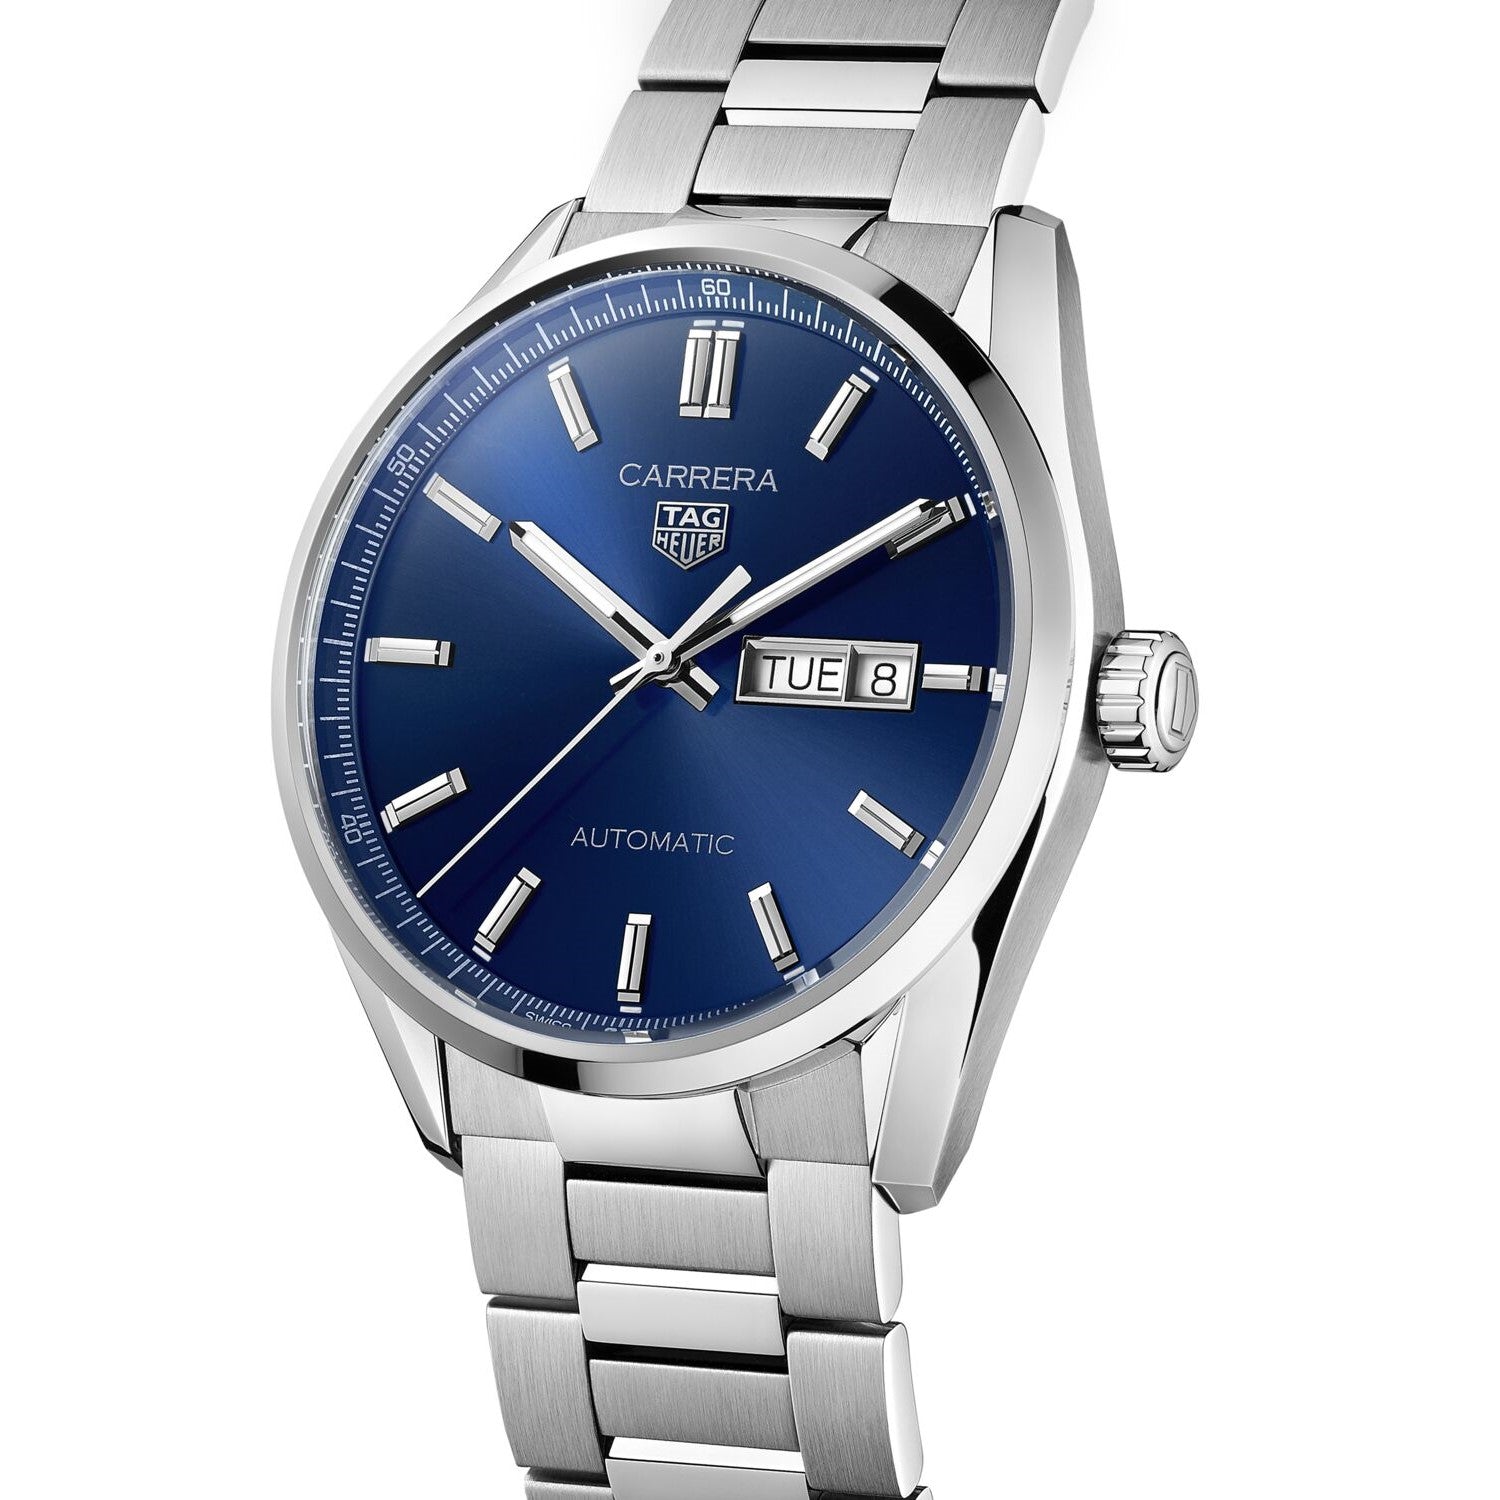 TAG Heuer Carrera 41mm Day-Date, model #WBN2012.BA0640, at IJL Since 1937